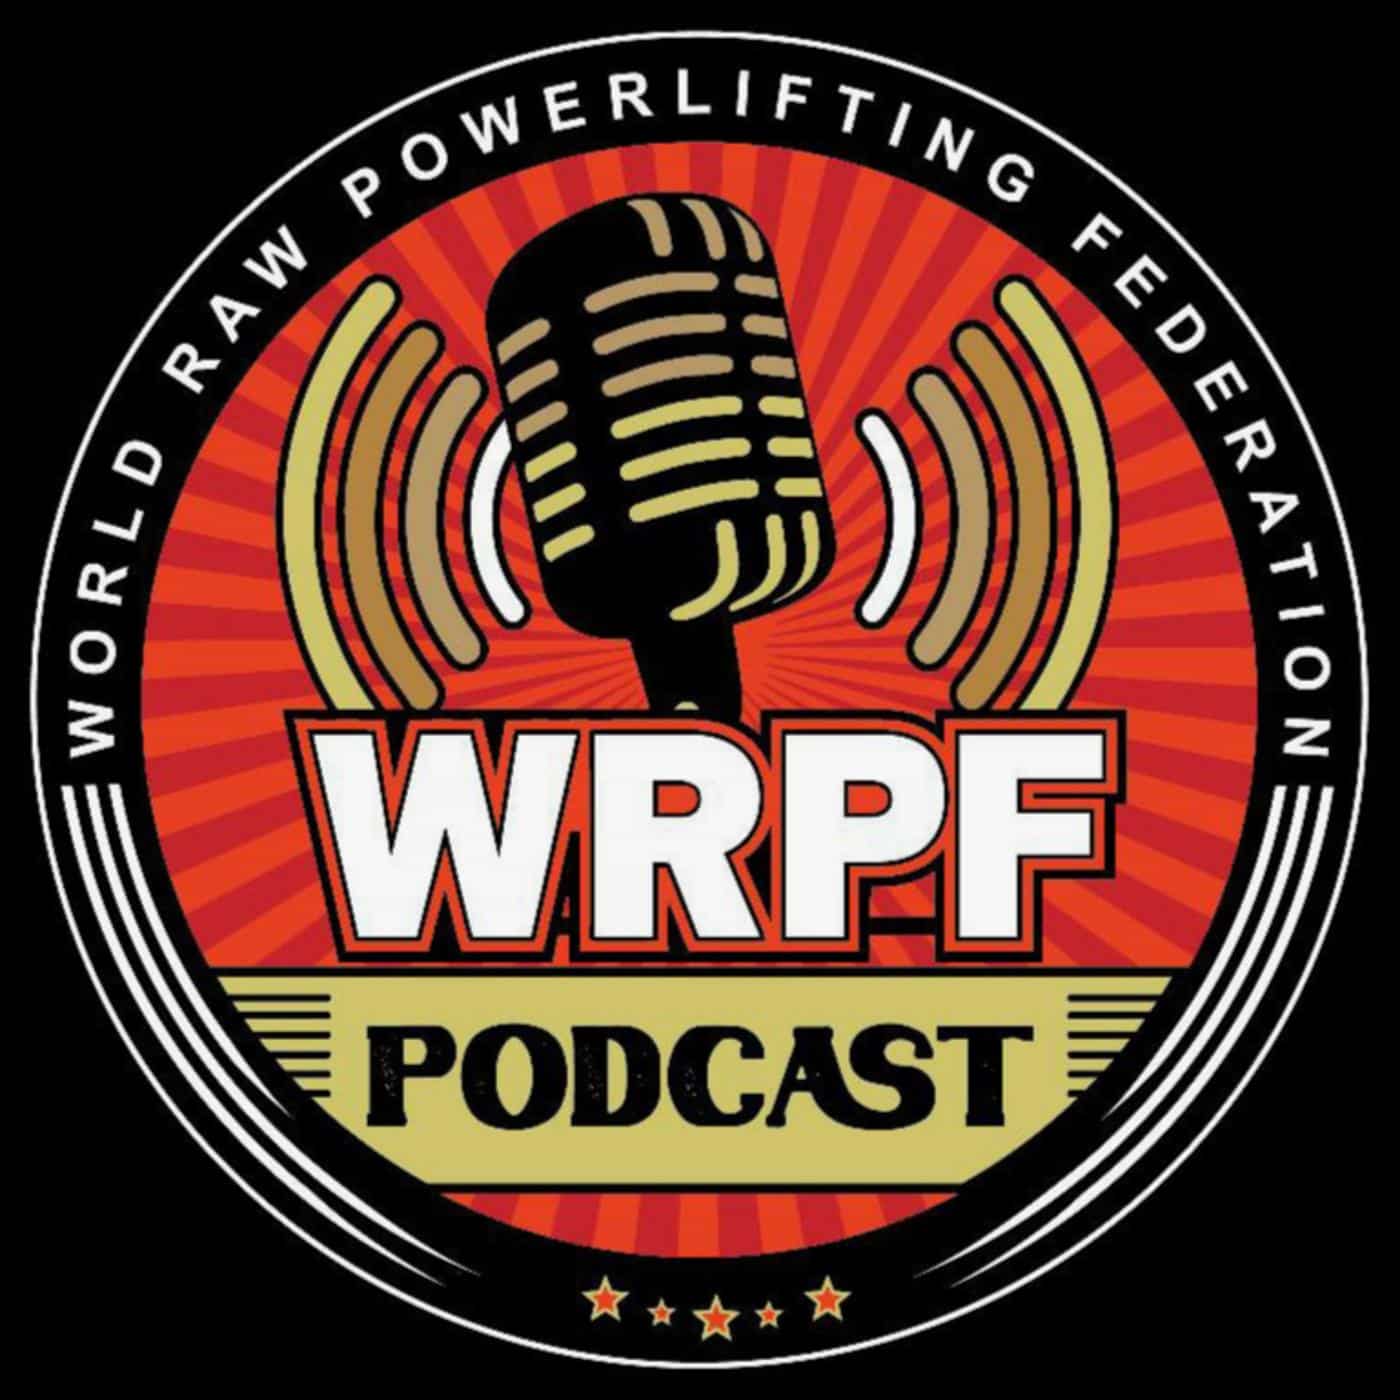 The WRPF Podcast